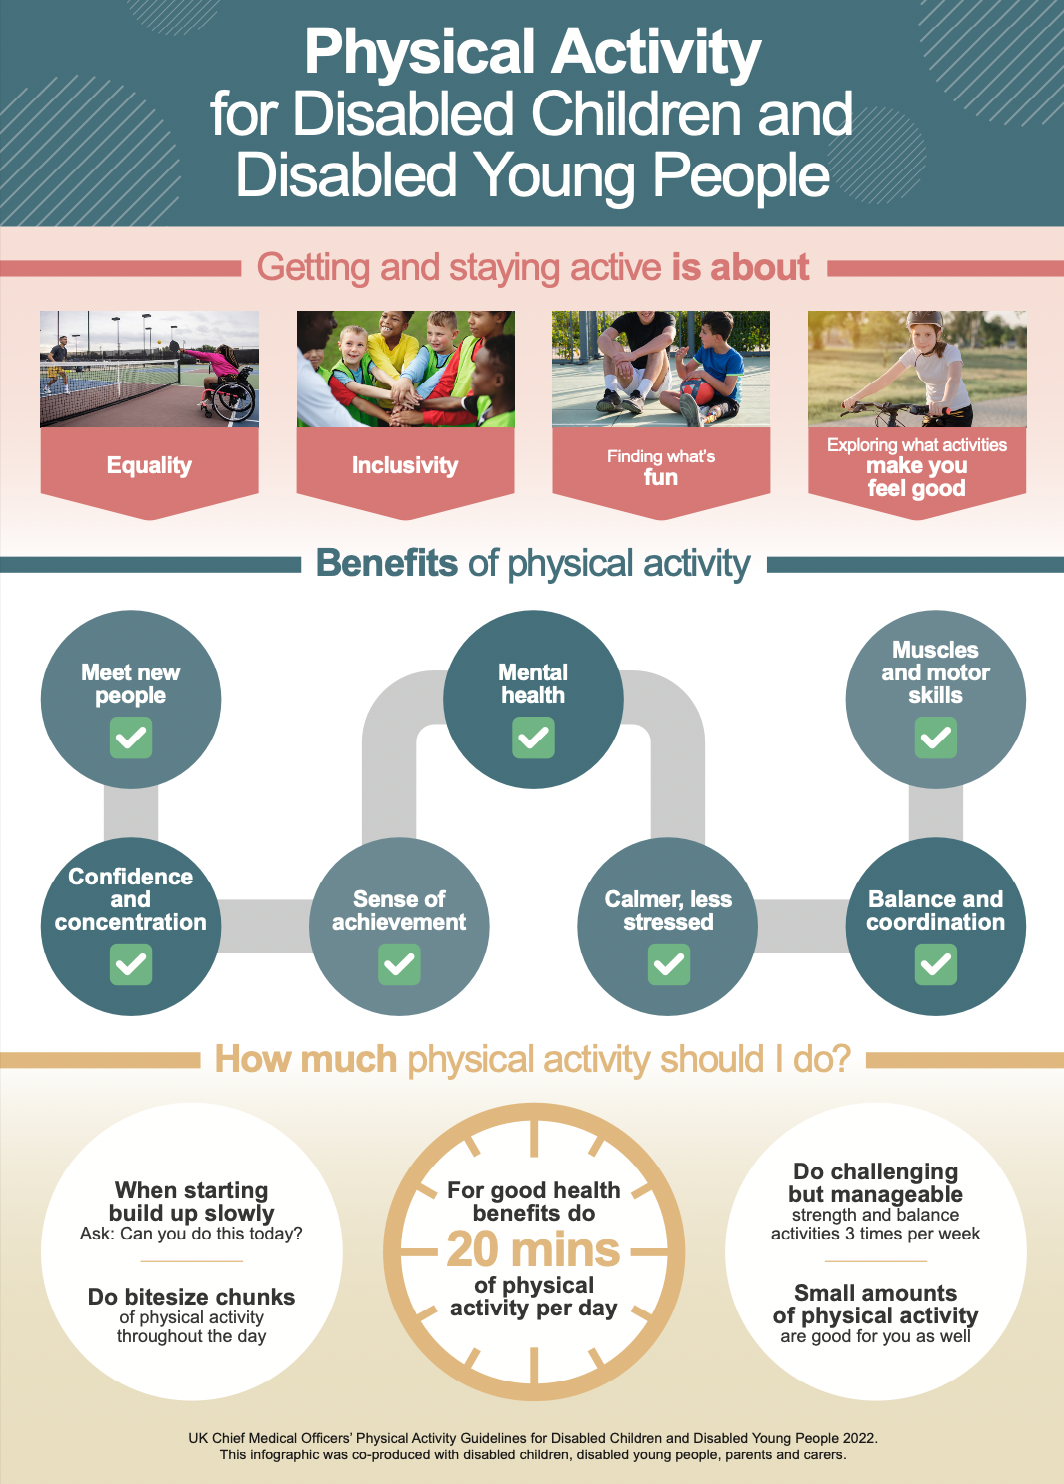 Physical Activity for Disabled Children and Disabled Young People - published 16 Feb 2022